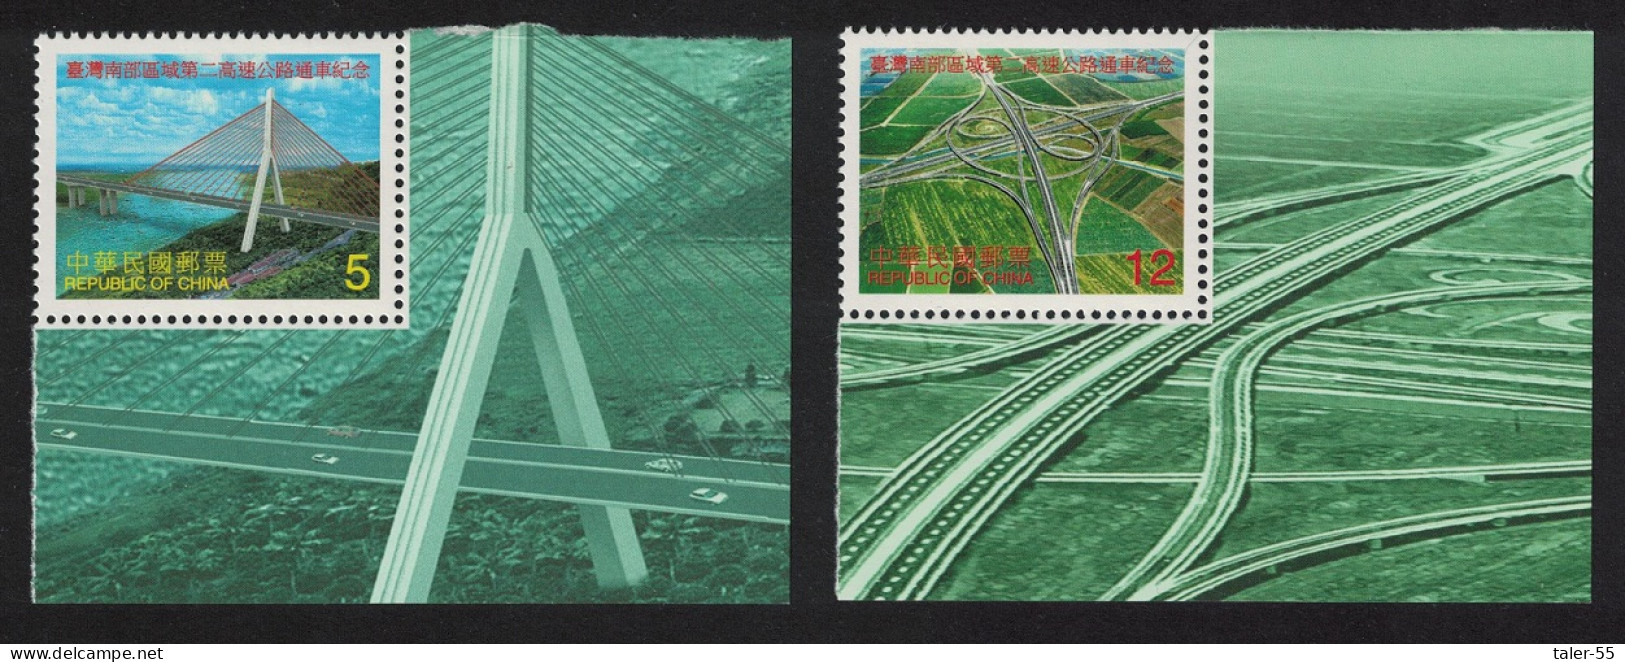 Taiwan Second Southern Freeway 2v Corners 2000 MNH SG#2620-2621 - Unused Stamps